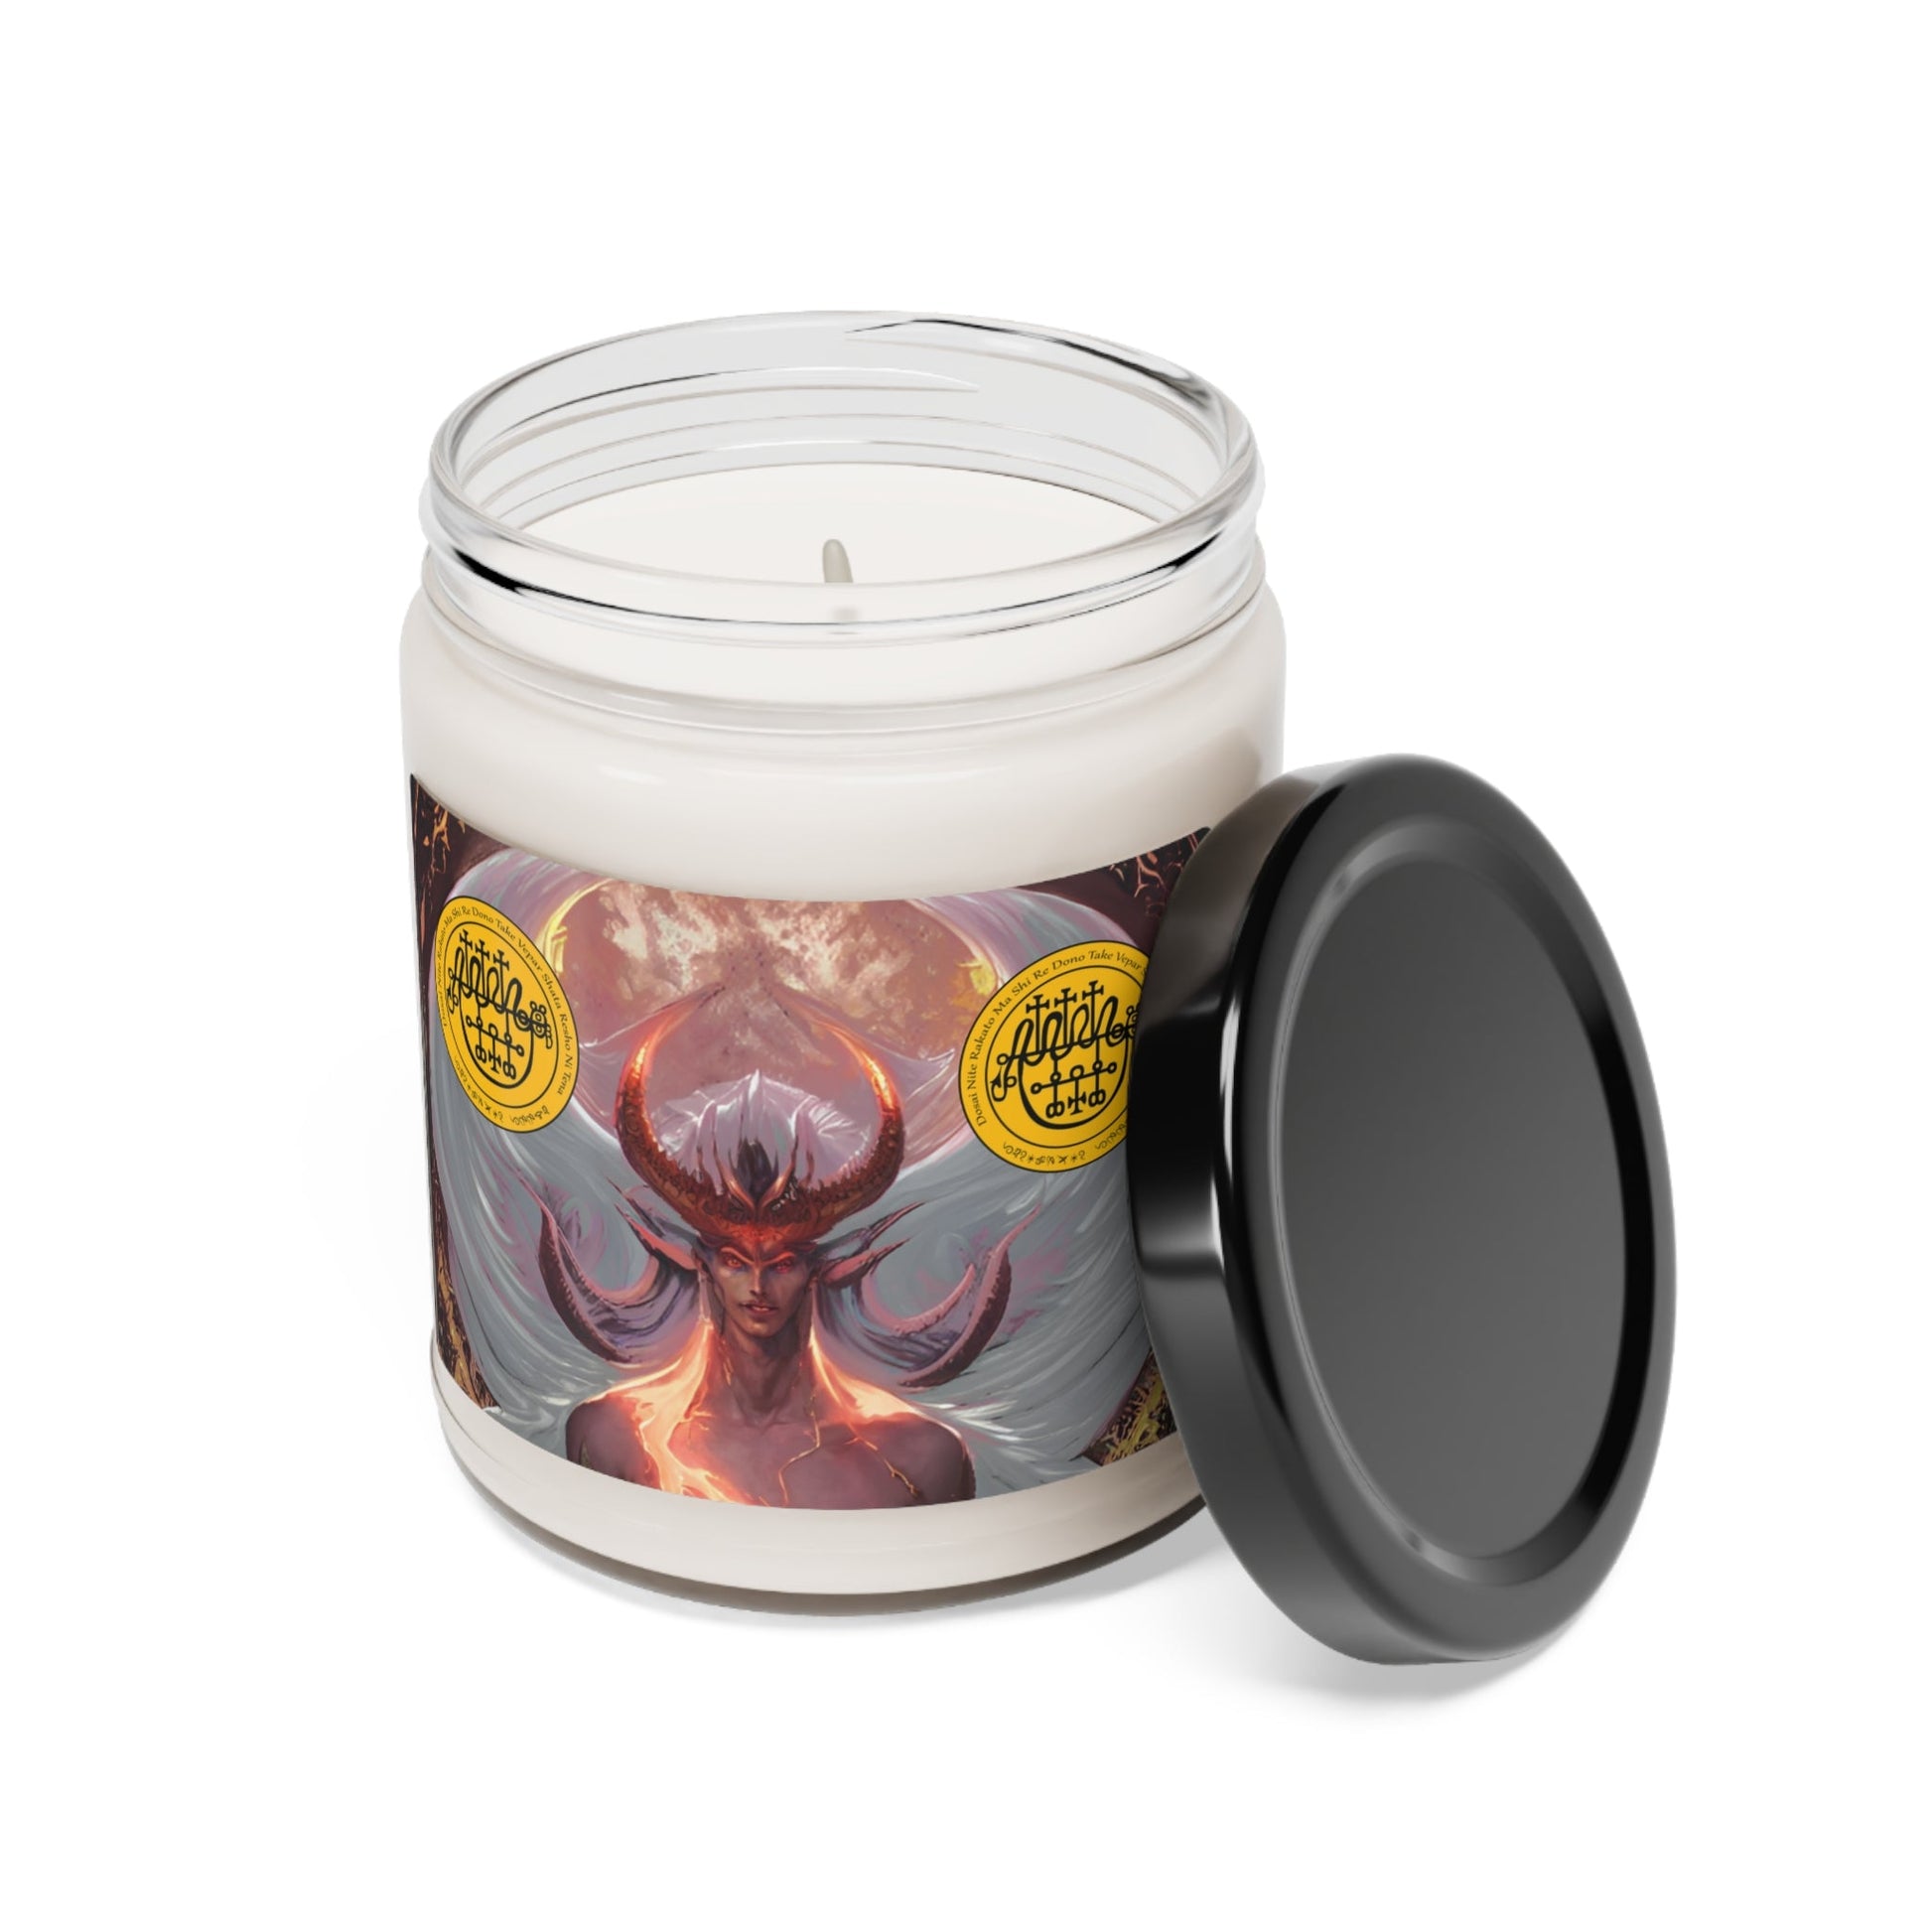 Demon-Vepar-Altar-Scented-Soy-Candle-for-offerings-rituals-initiations-or-praying-and-meditation-7